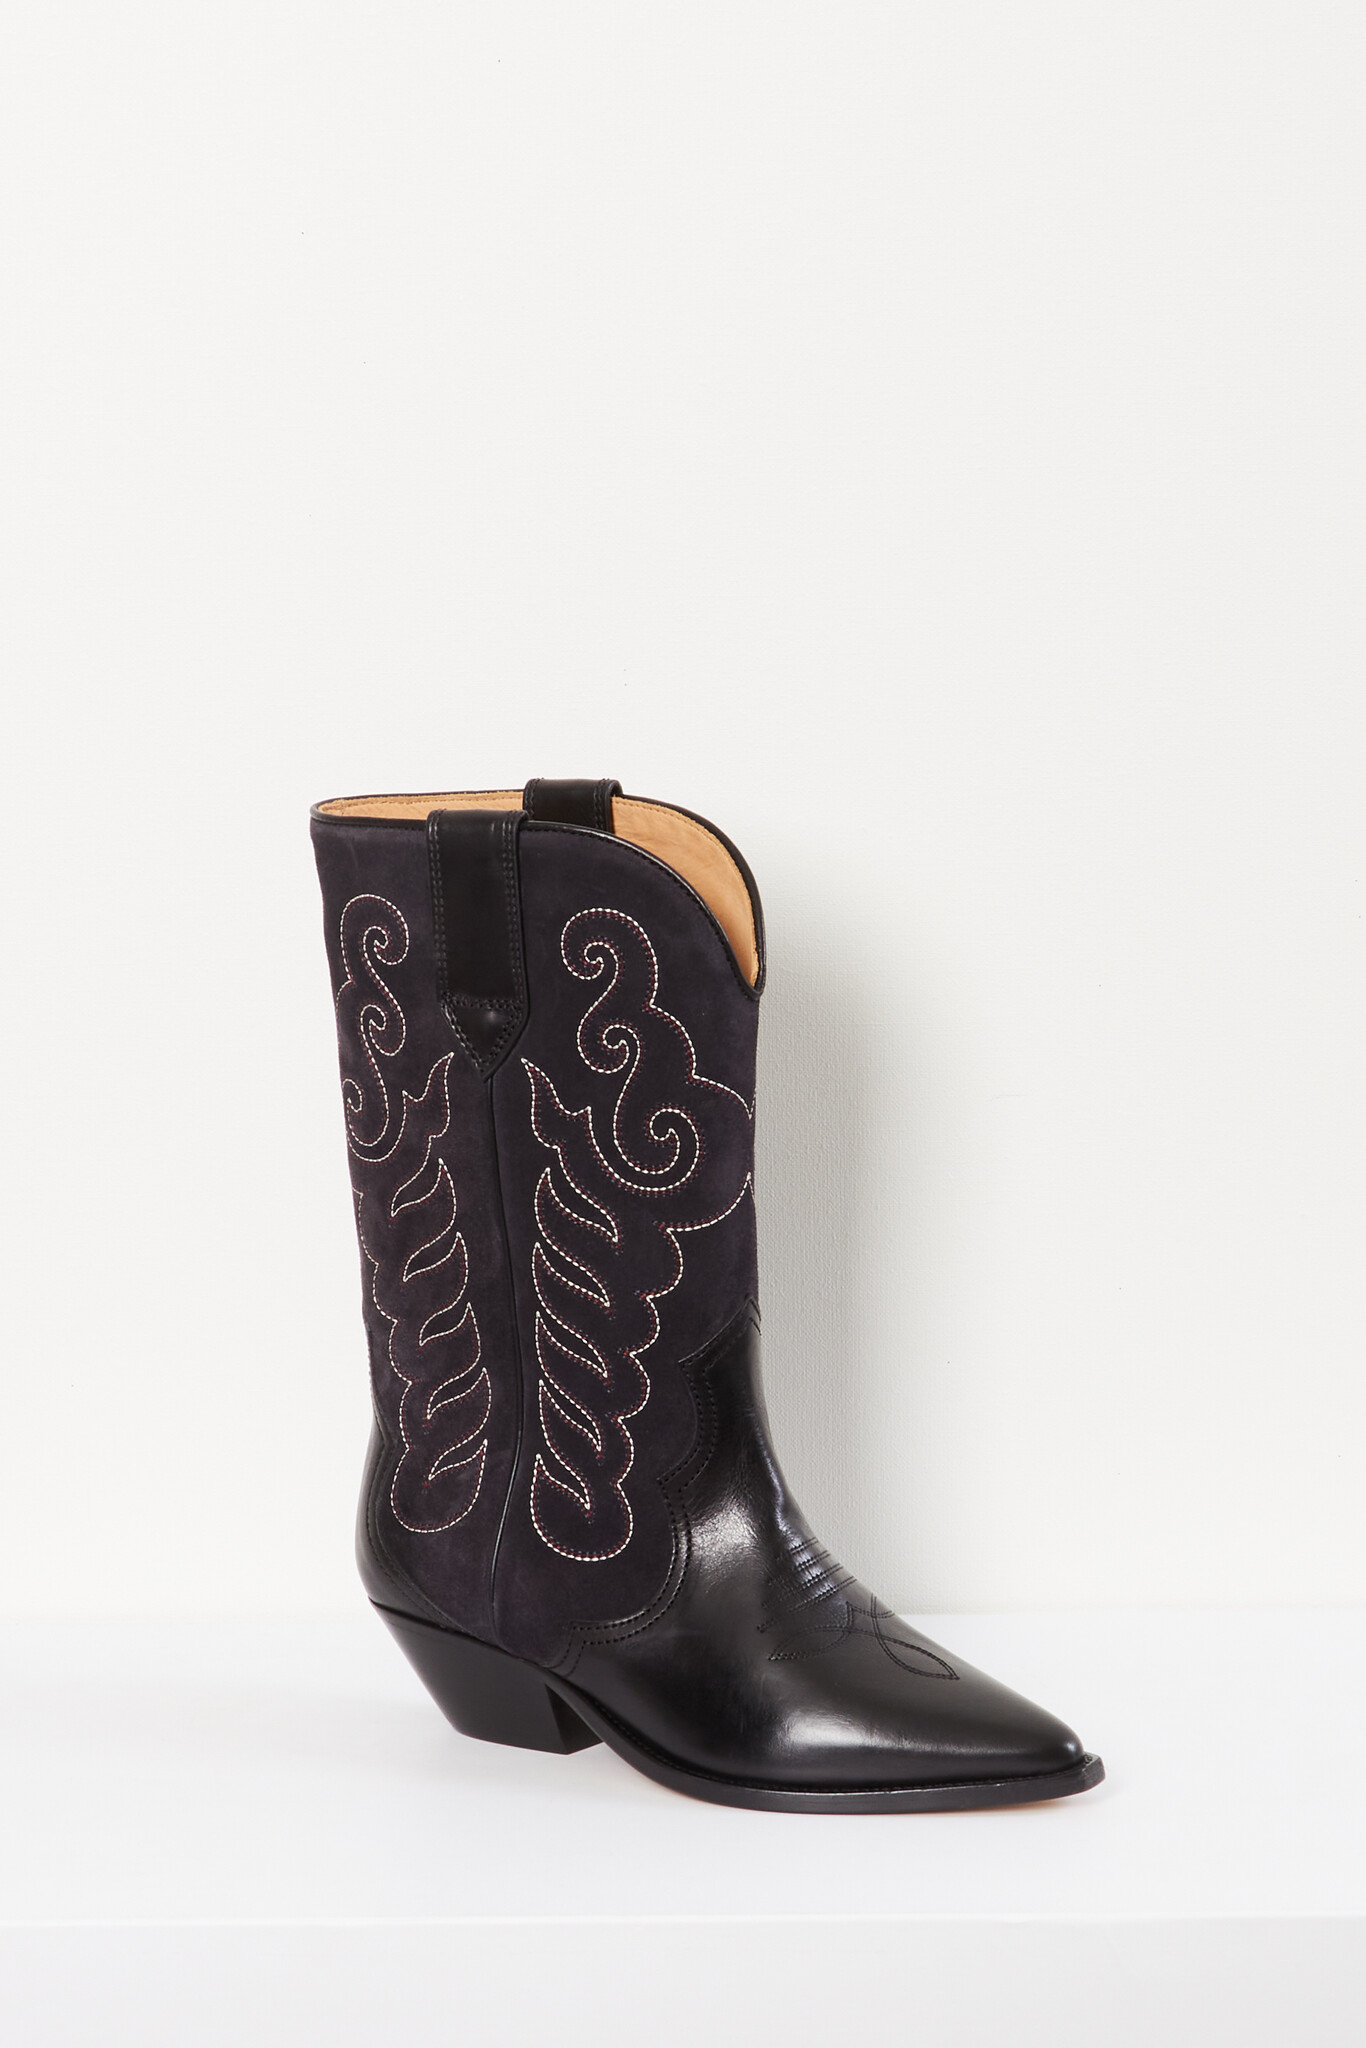 Isabel Marant - Duerto embroidered boots